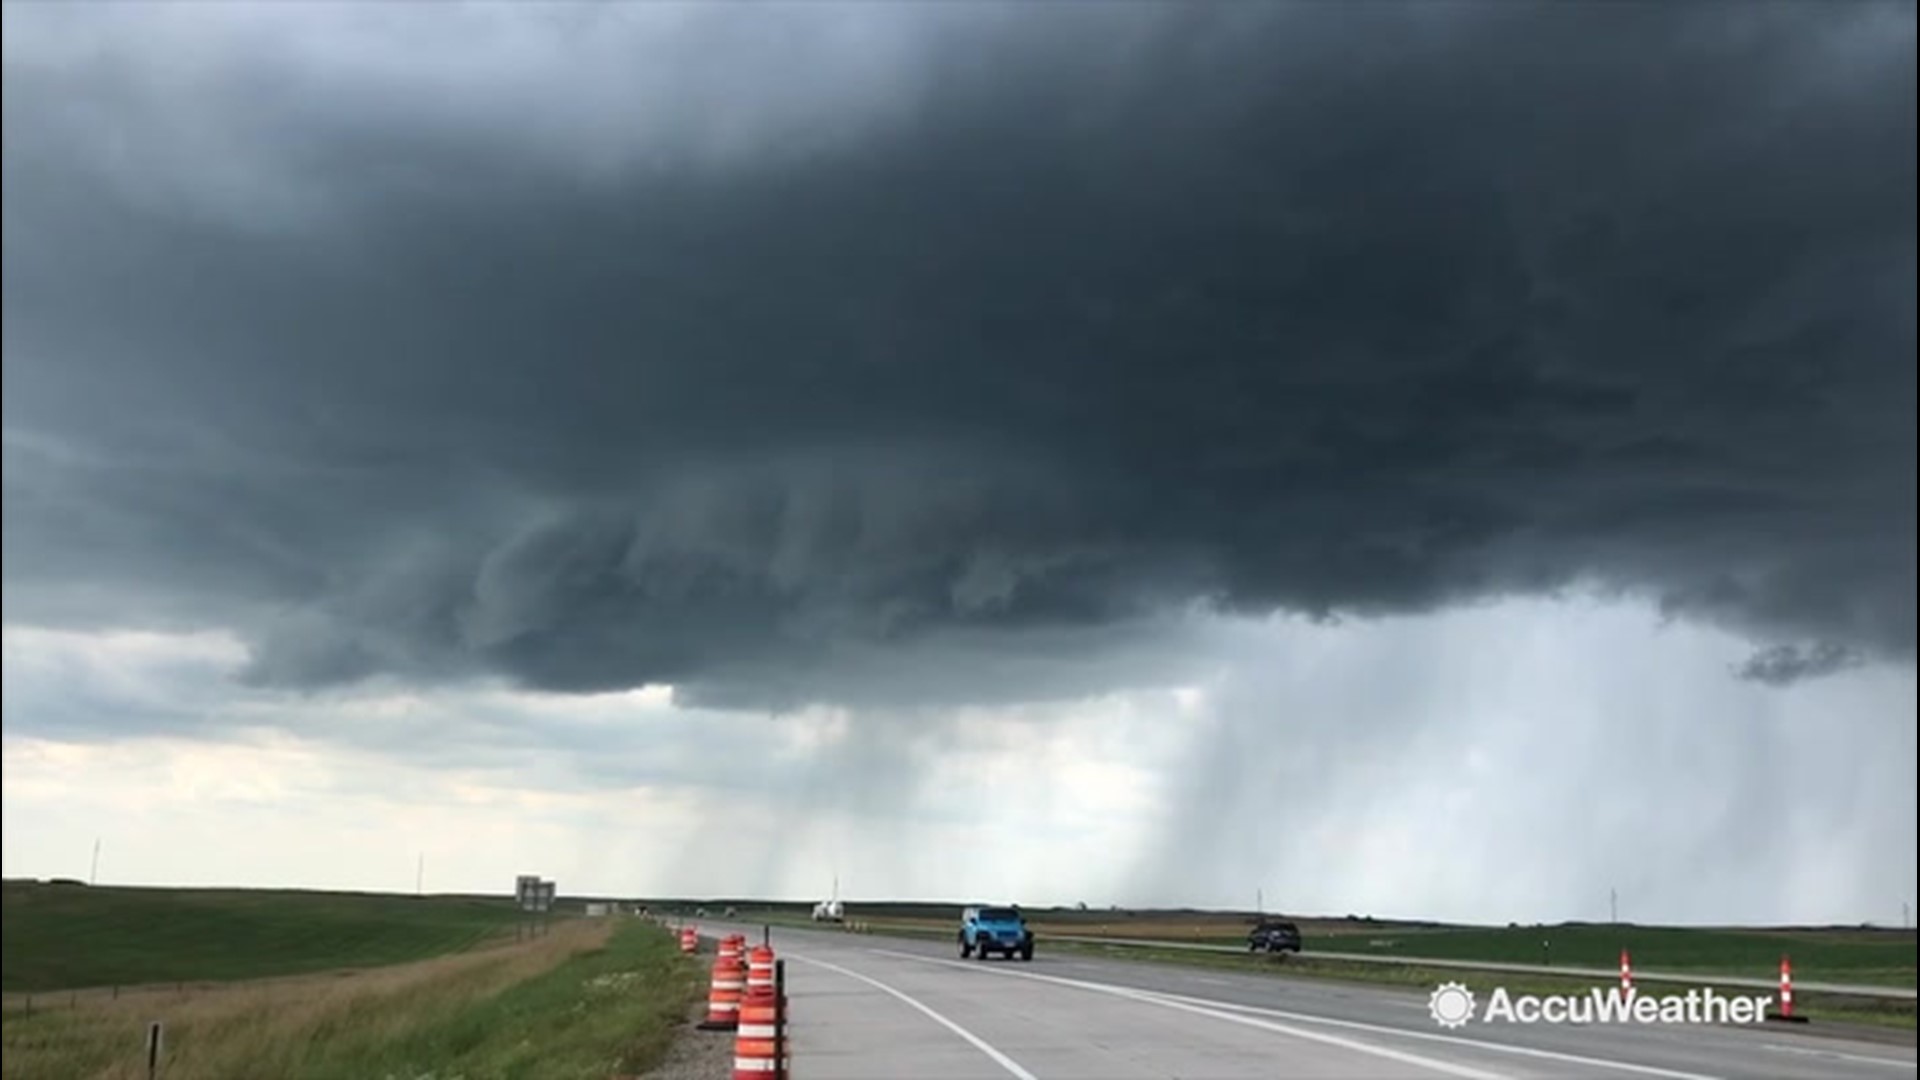 AccuWeather's Reed Timmer spotted this severe thunderstorm near Kadoka, South Dakota, on August 9. Multiple storms were spotted across South Dakota, some with the potential to become tornadoes.